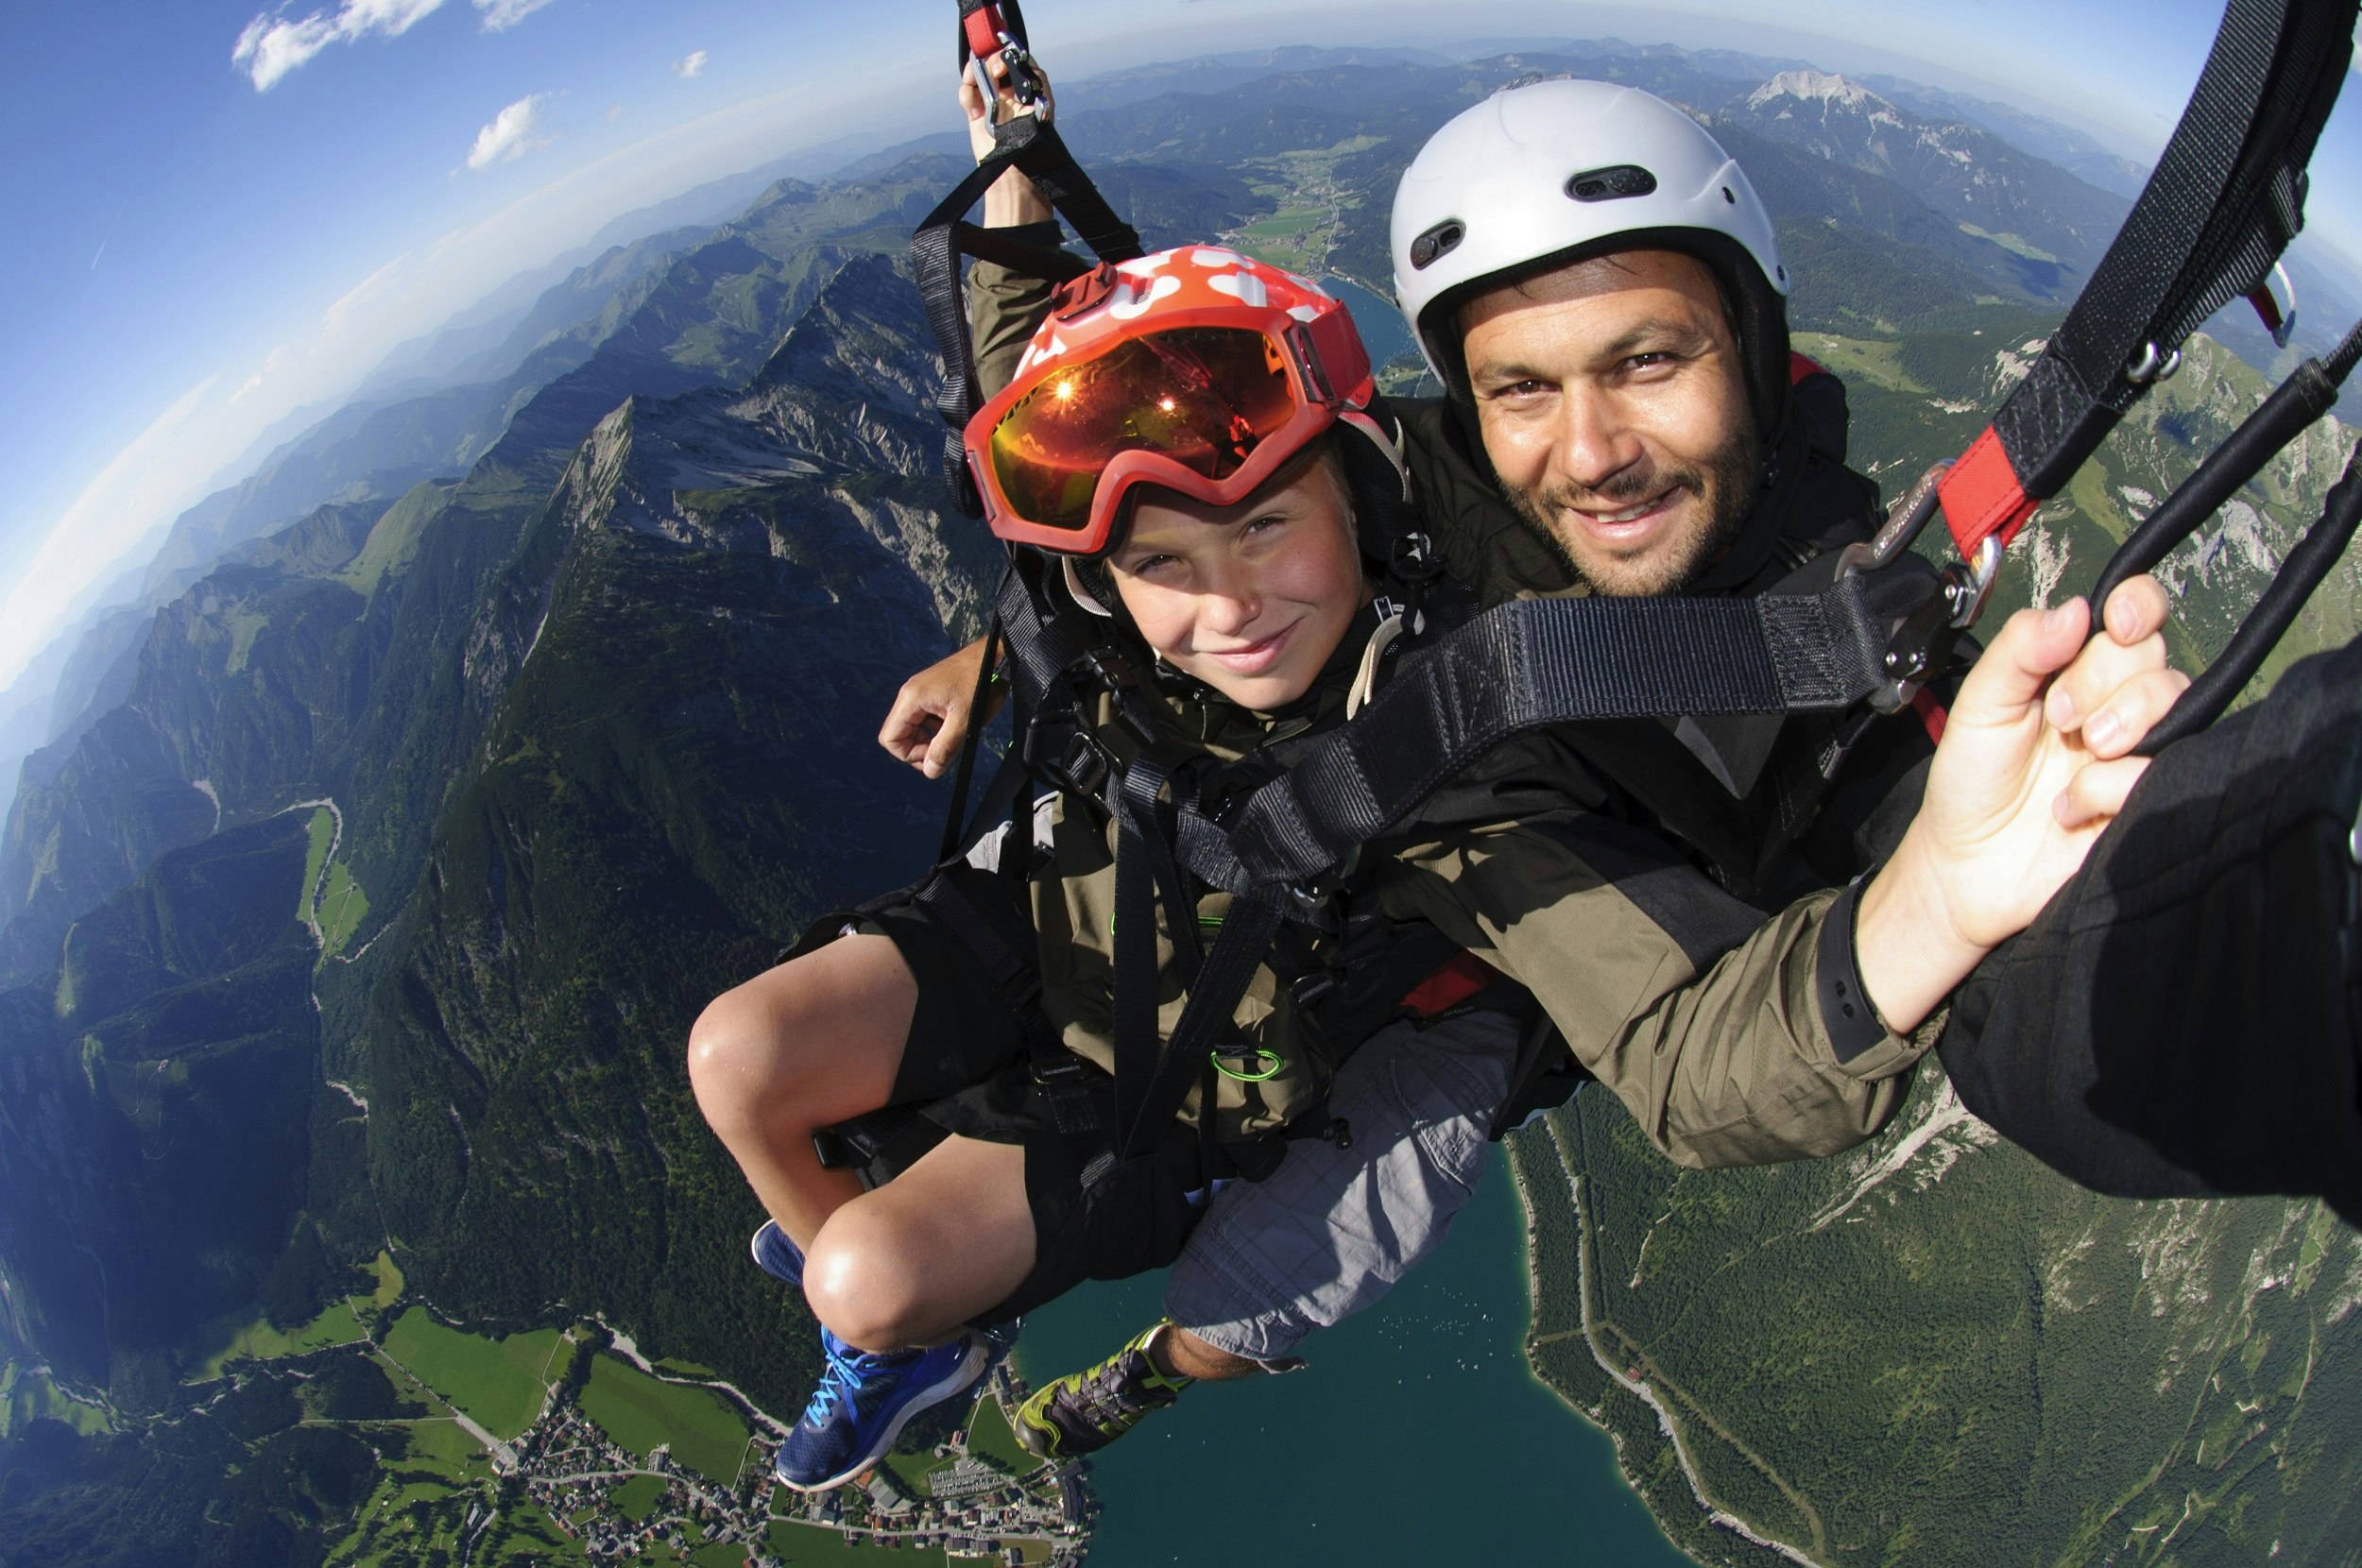 A paragliding pilot together with his youngest son, high up with a tandem paraglider above lake Achensee in Tirol, Austria. The pilot and the child are looking into the picture with a big smile. In the background mountain landscape in summer.